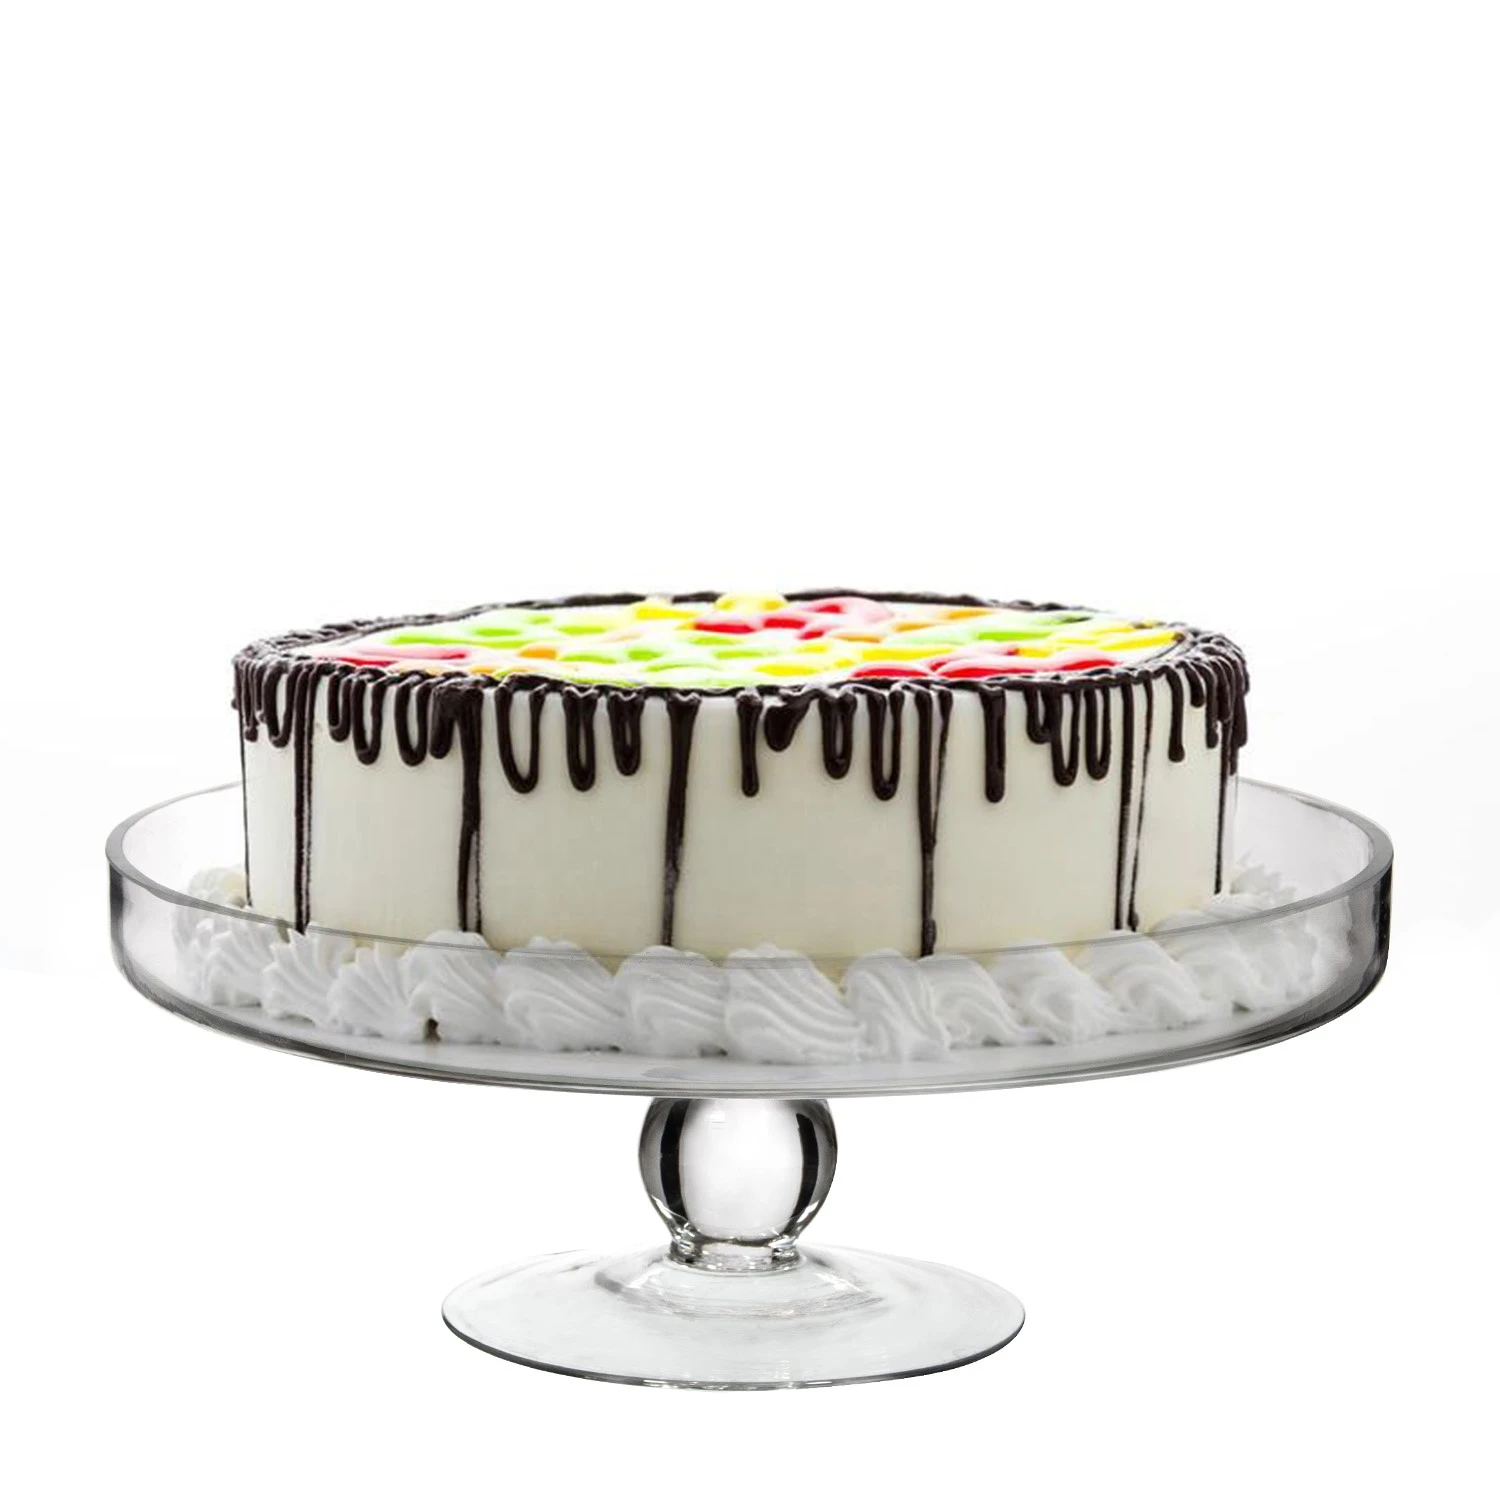 Wholesale Cheap High Quality Food Grade Materials Clear Cake Stand With Dome Cover Cake Plate Stand Cake Plate